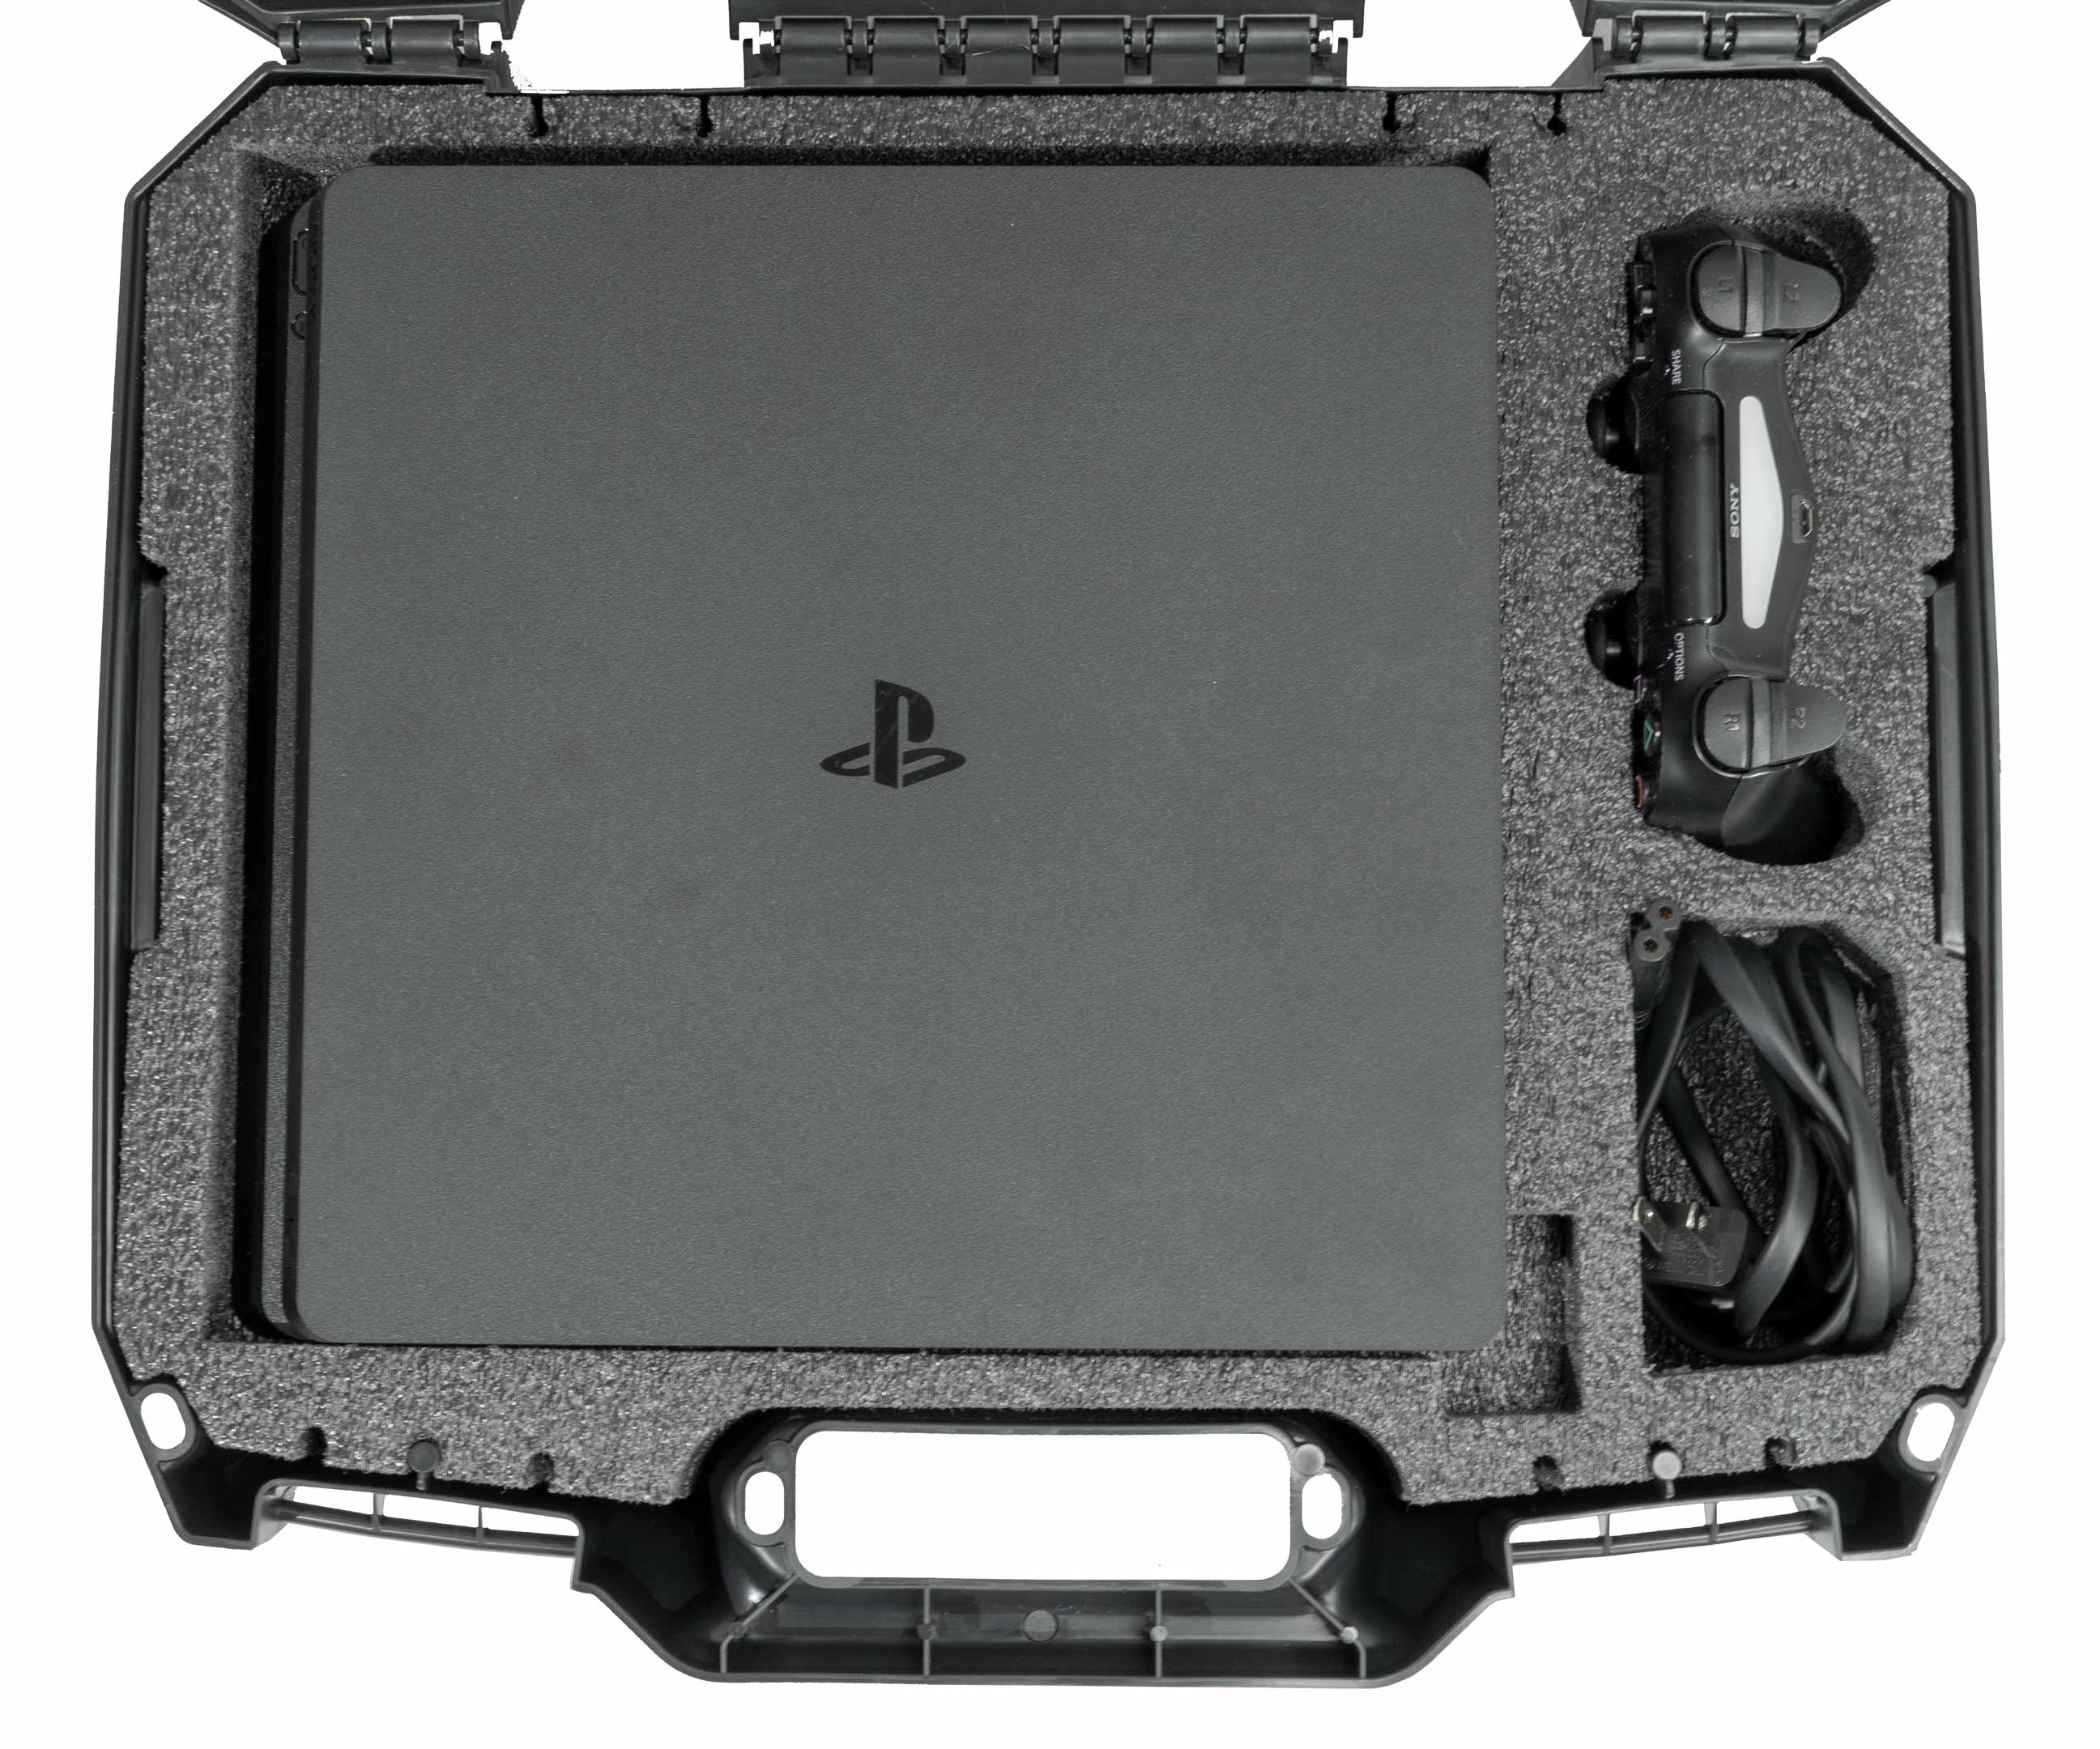 PlayStation 4 / PS4 Slim Carry Case Gaming Console Cases